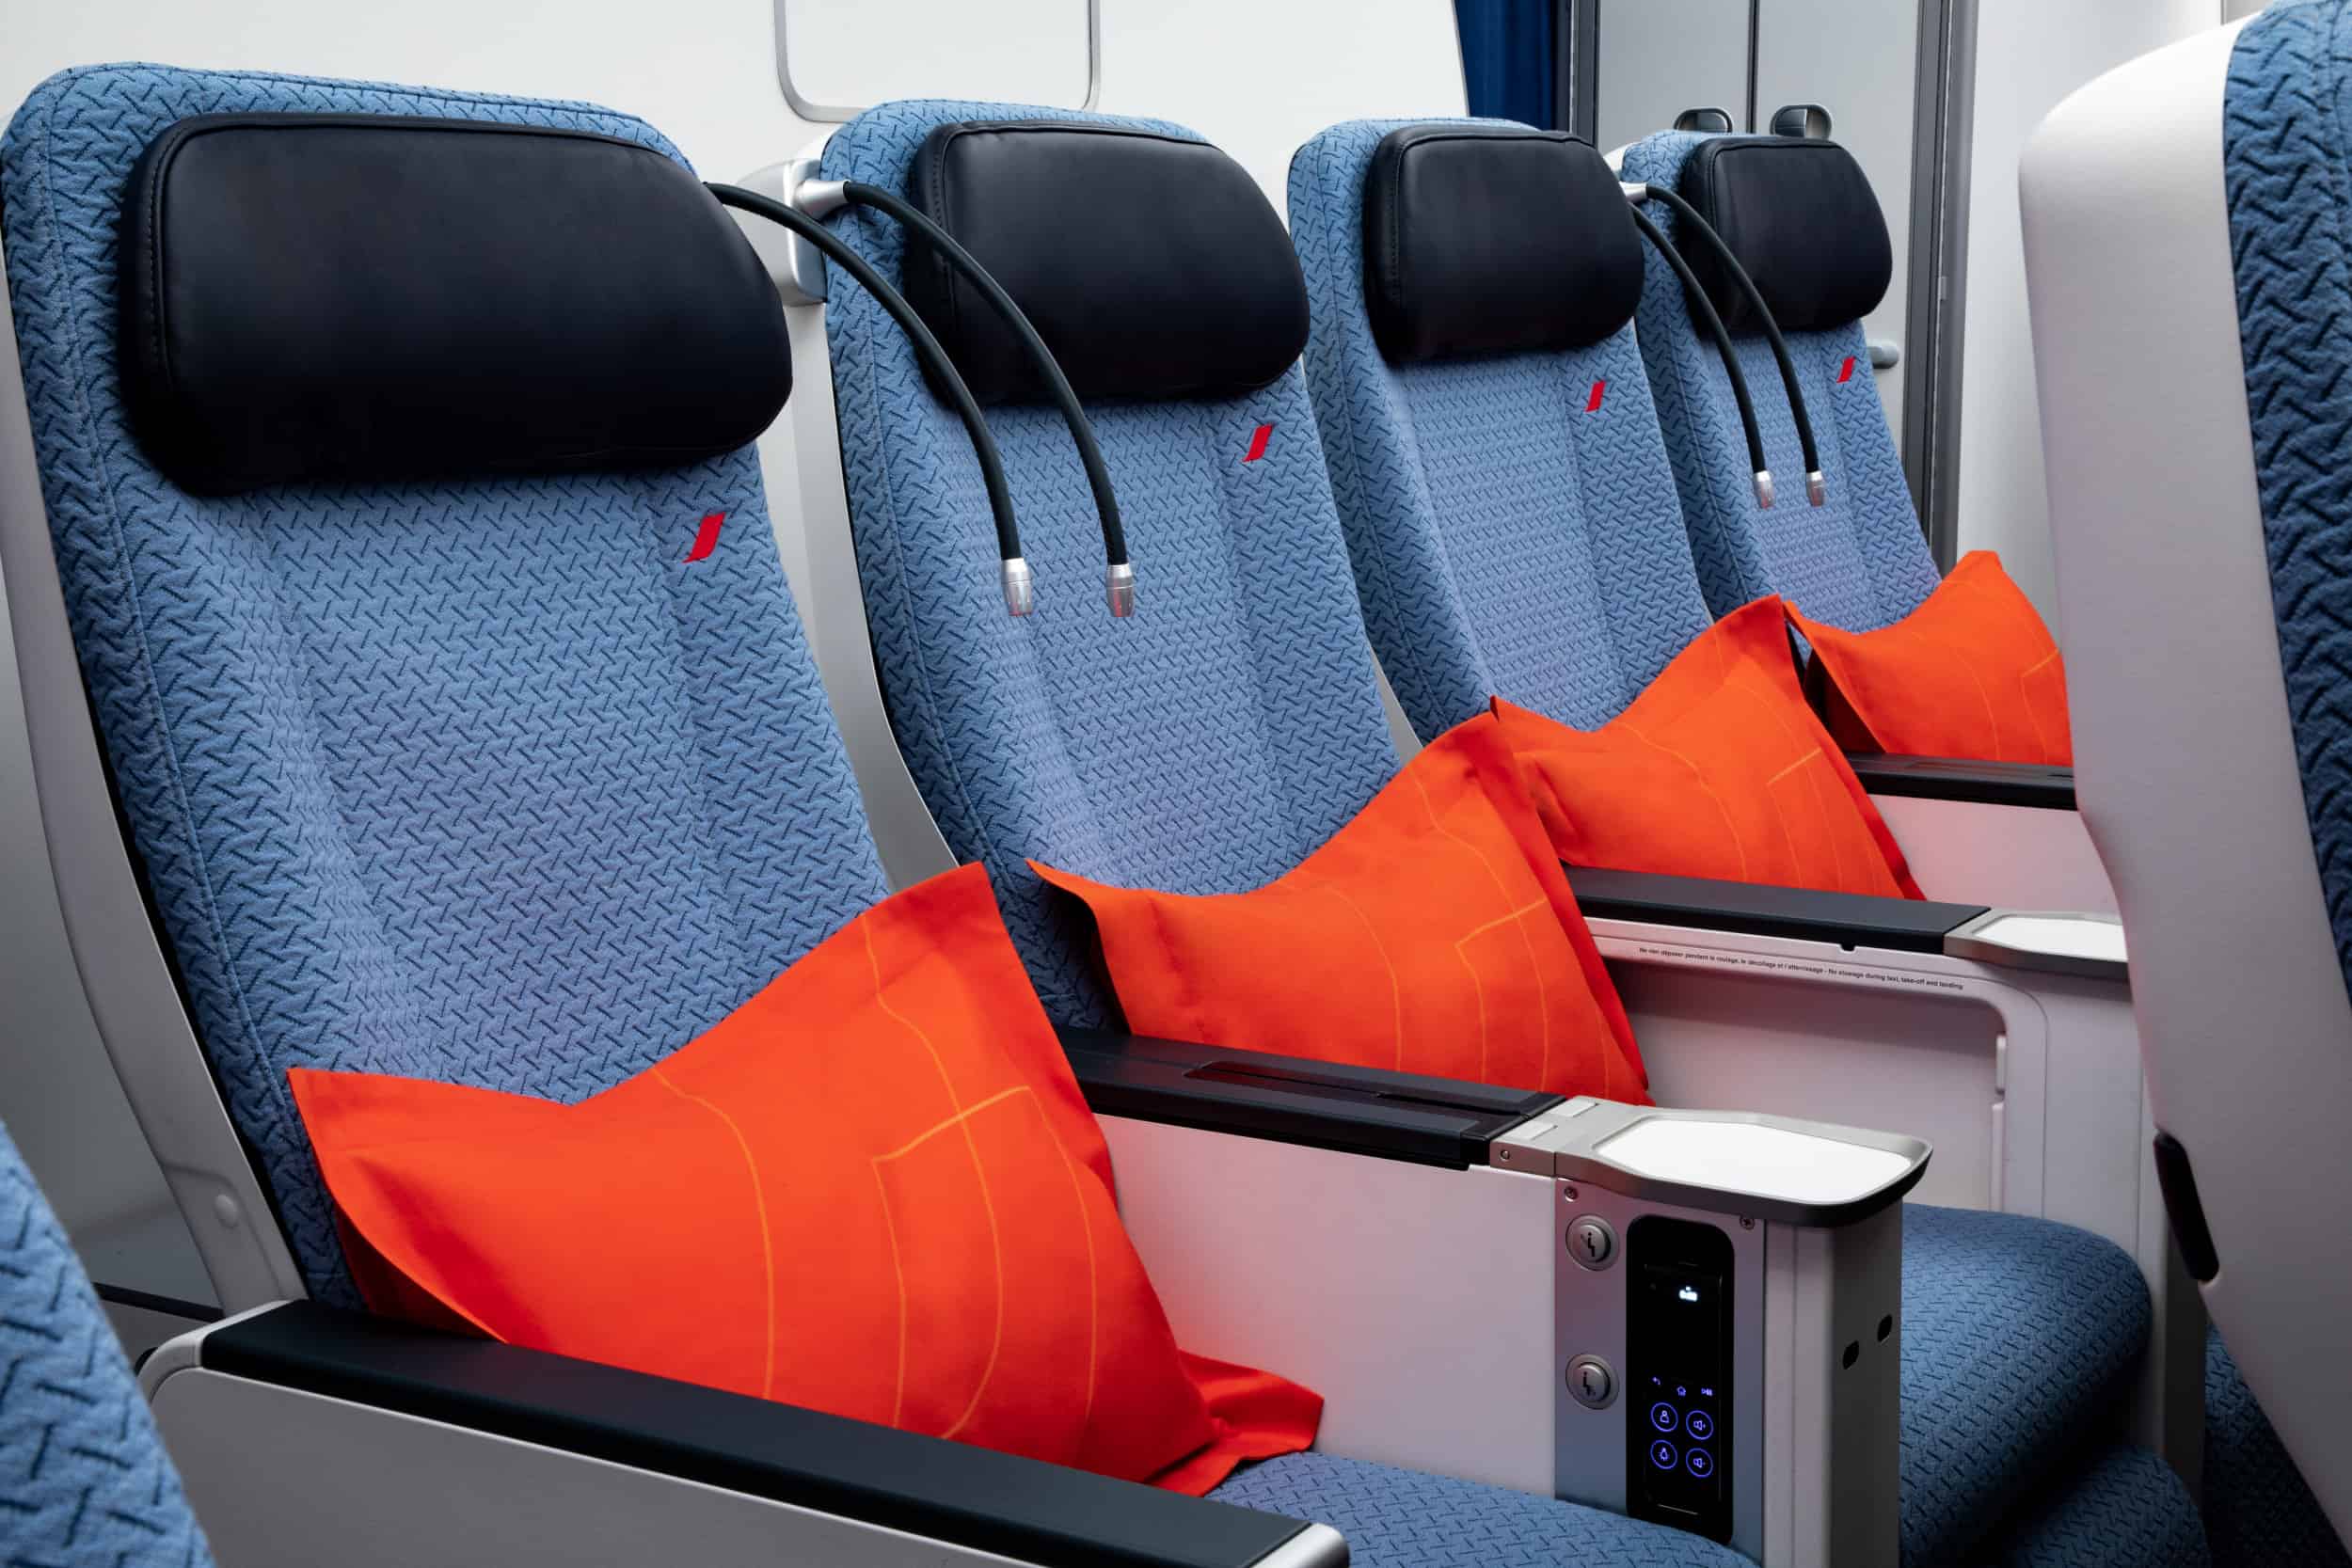 Air France Premium Economy: What to Know and How to Snag a Deal